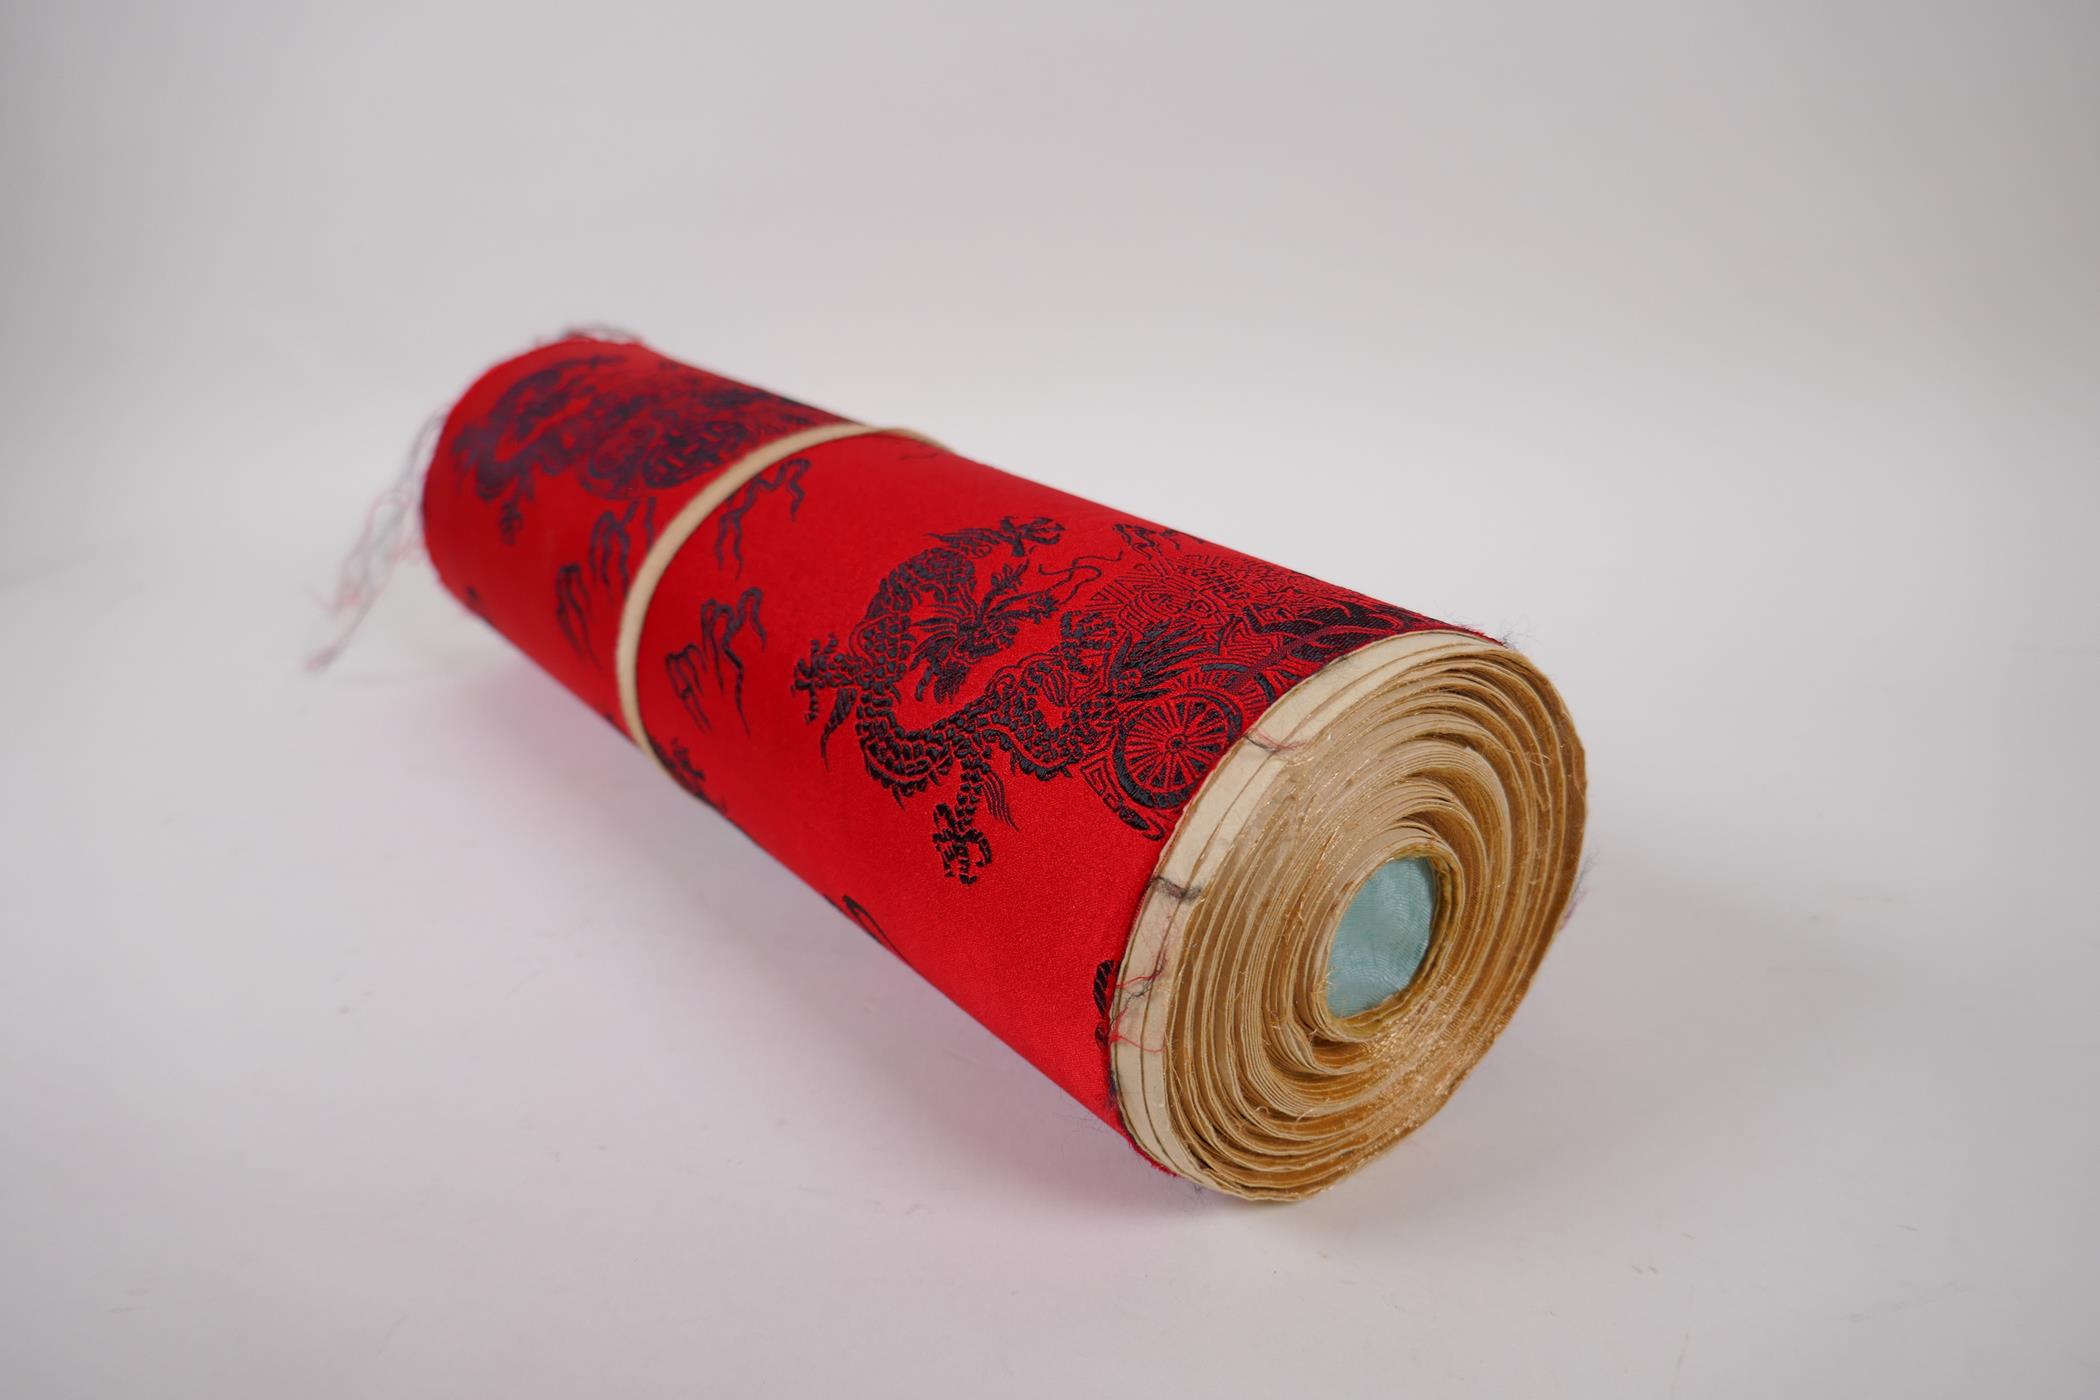 An extensive Chinese printed scroll depicting Buddhist deities, 29cm - Image 24 of 24